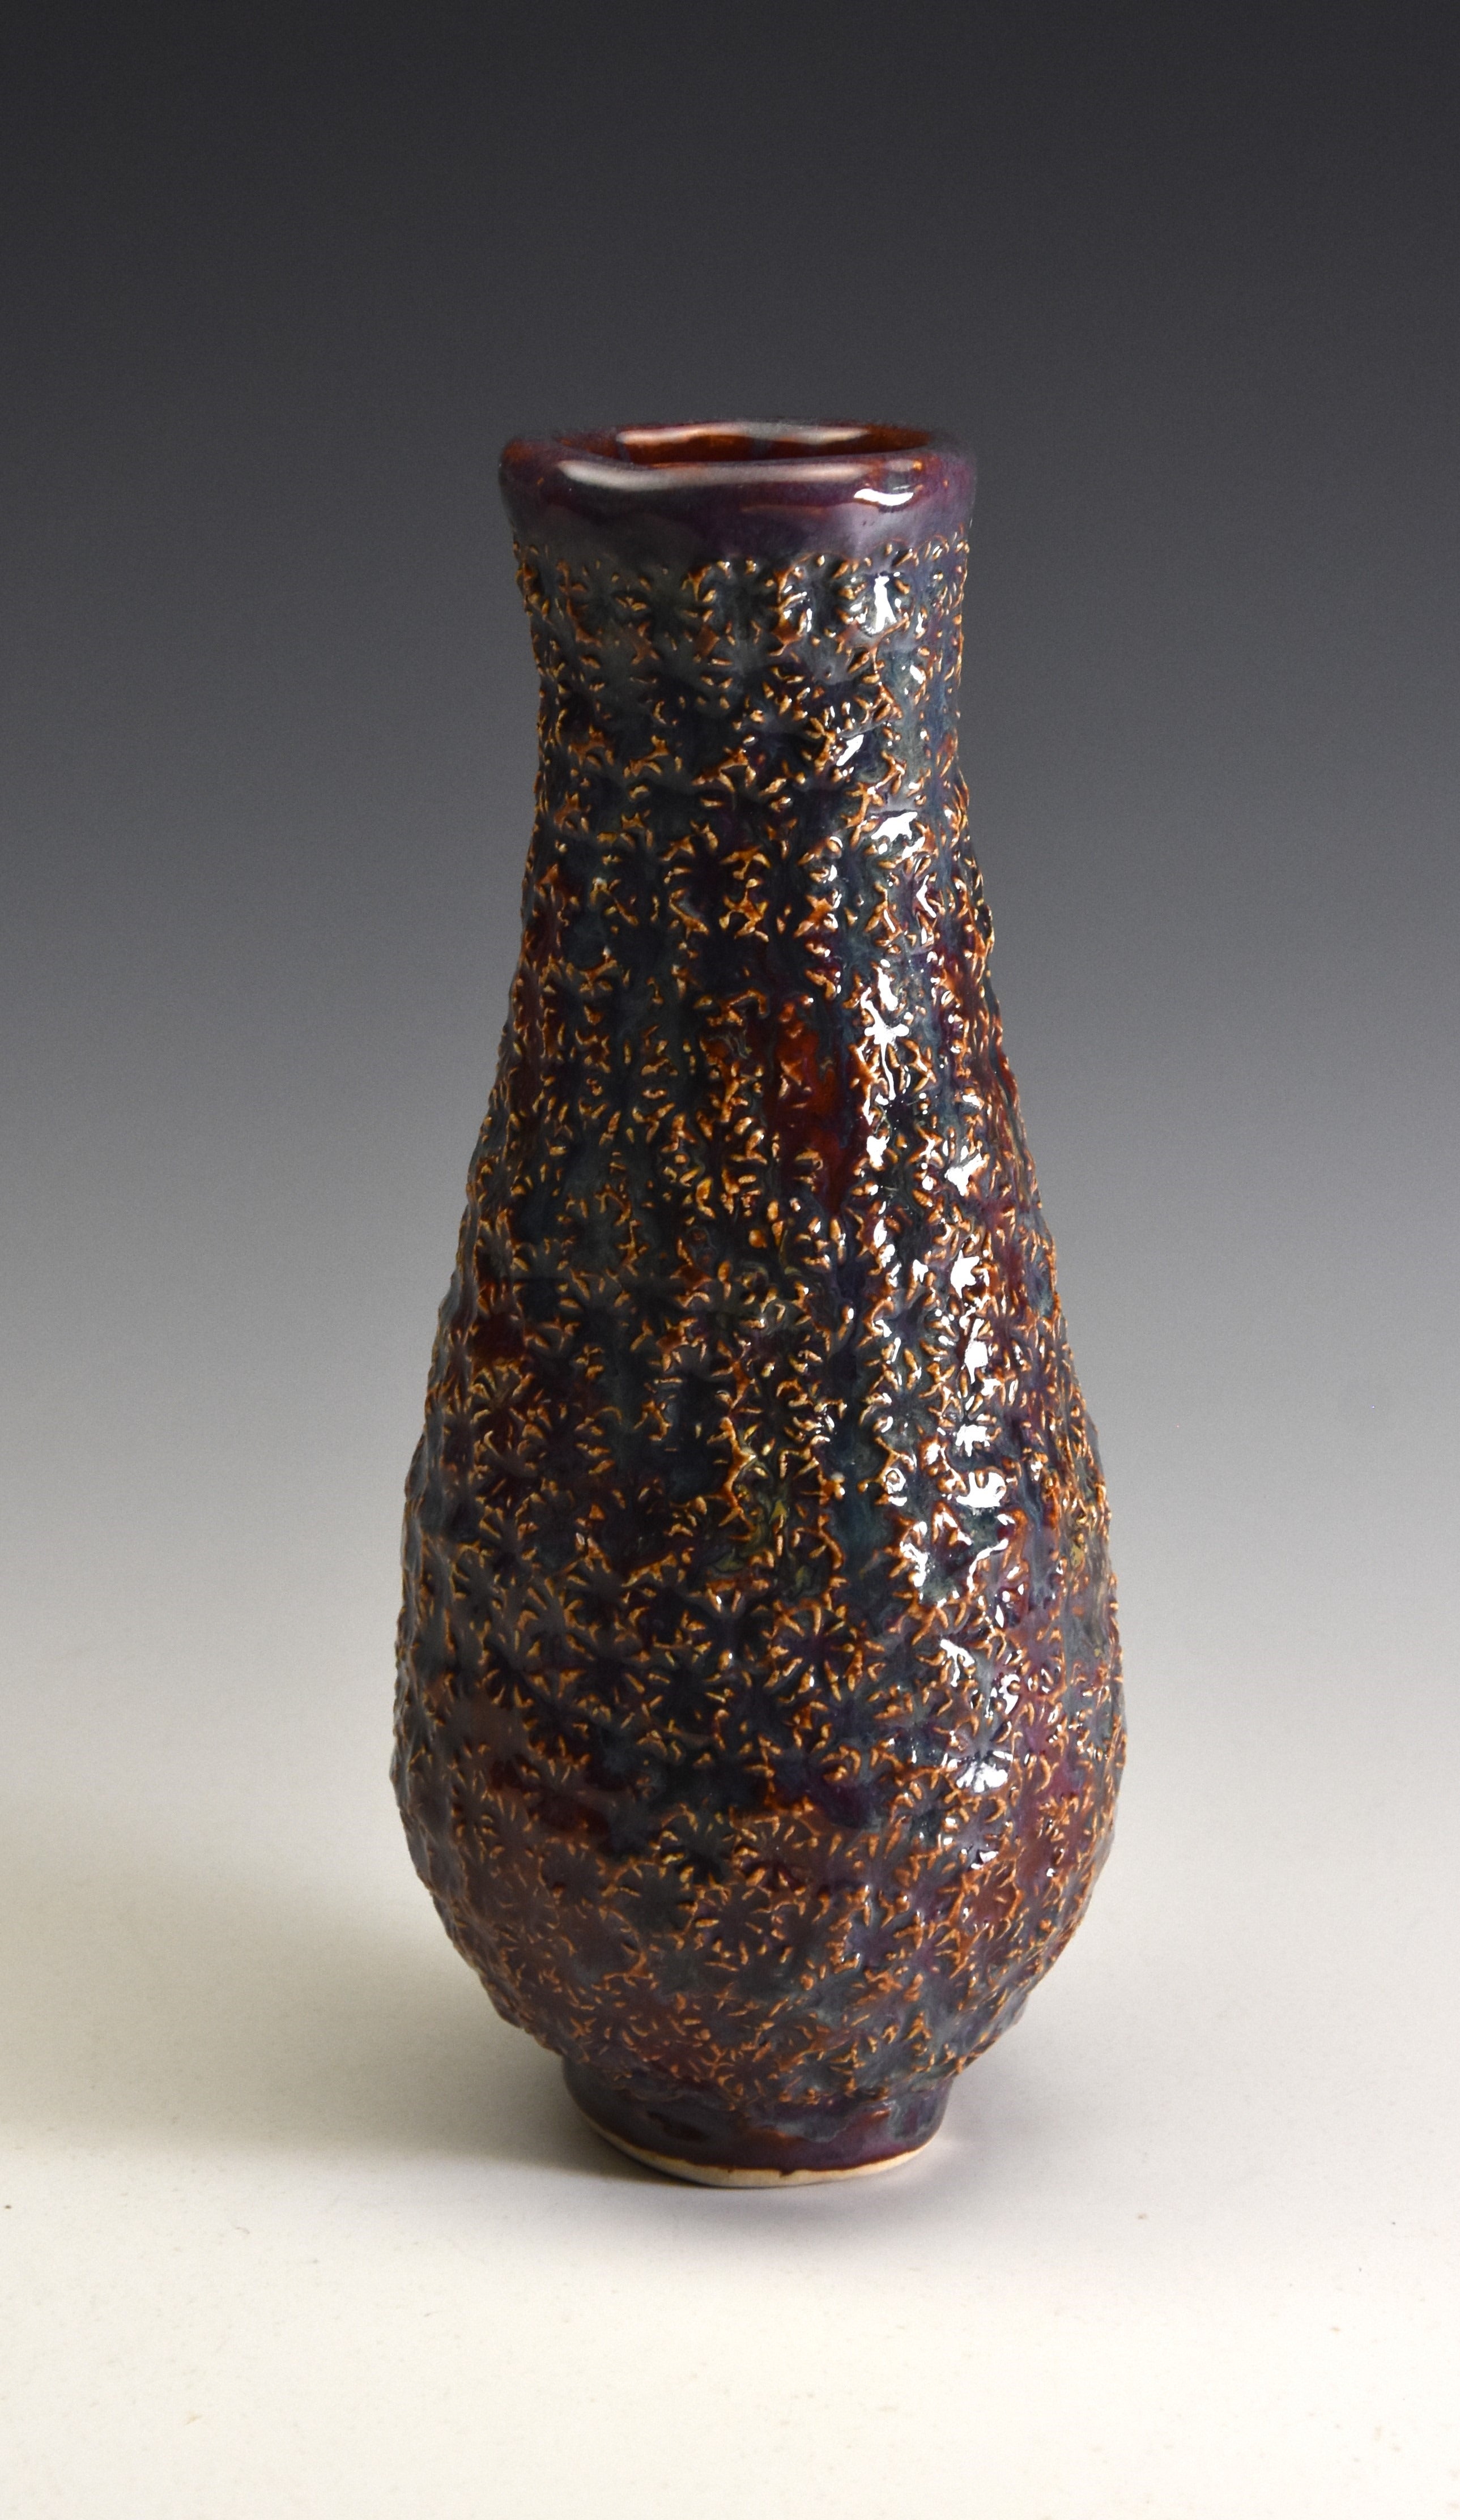 Mini textured med vase in blue, purple and sienna